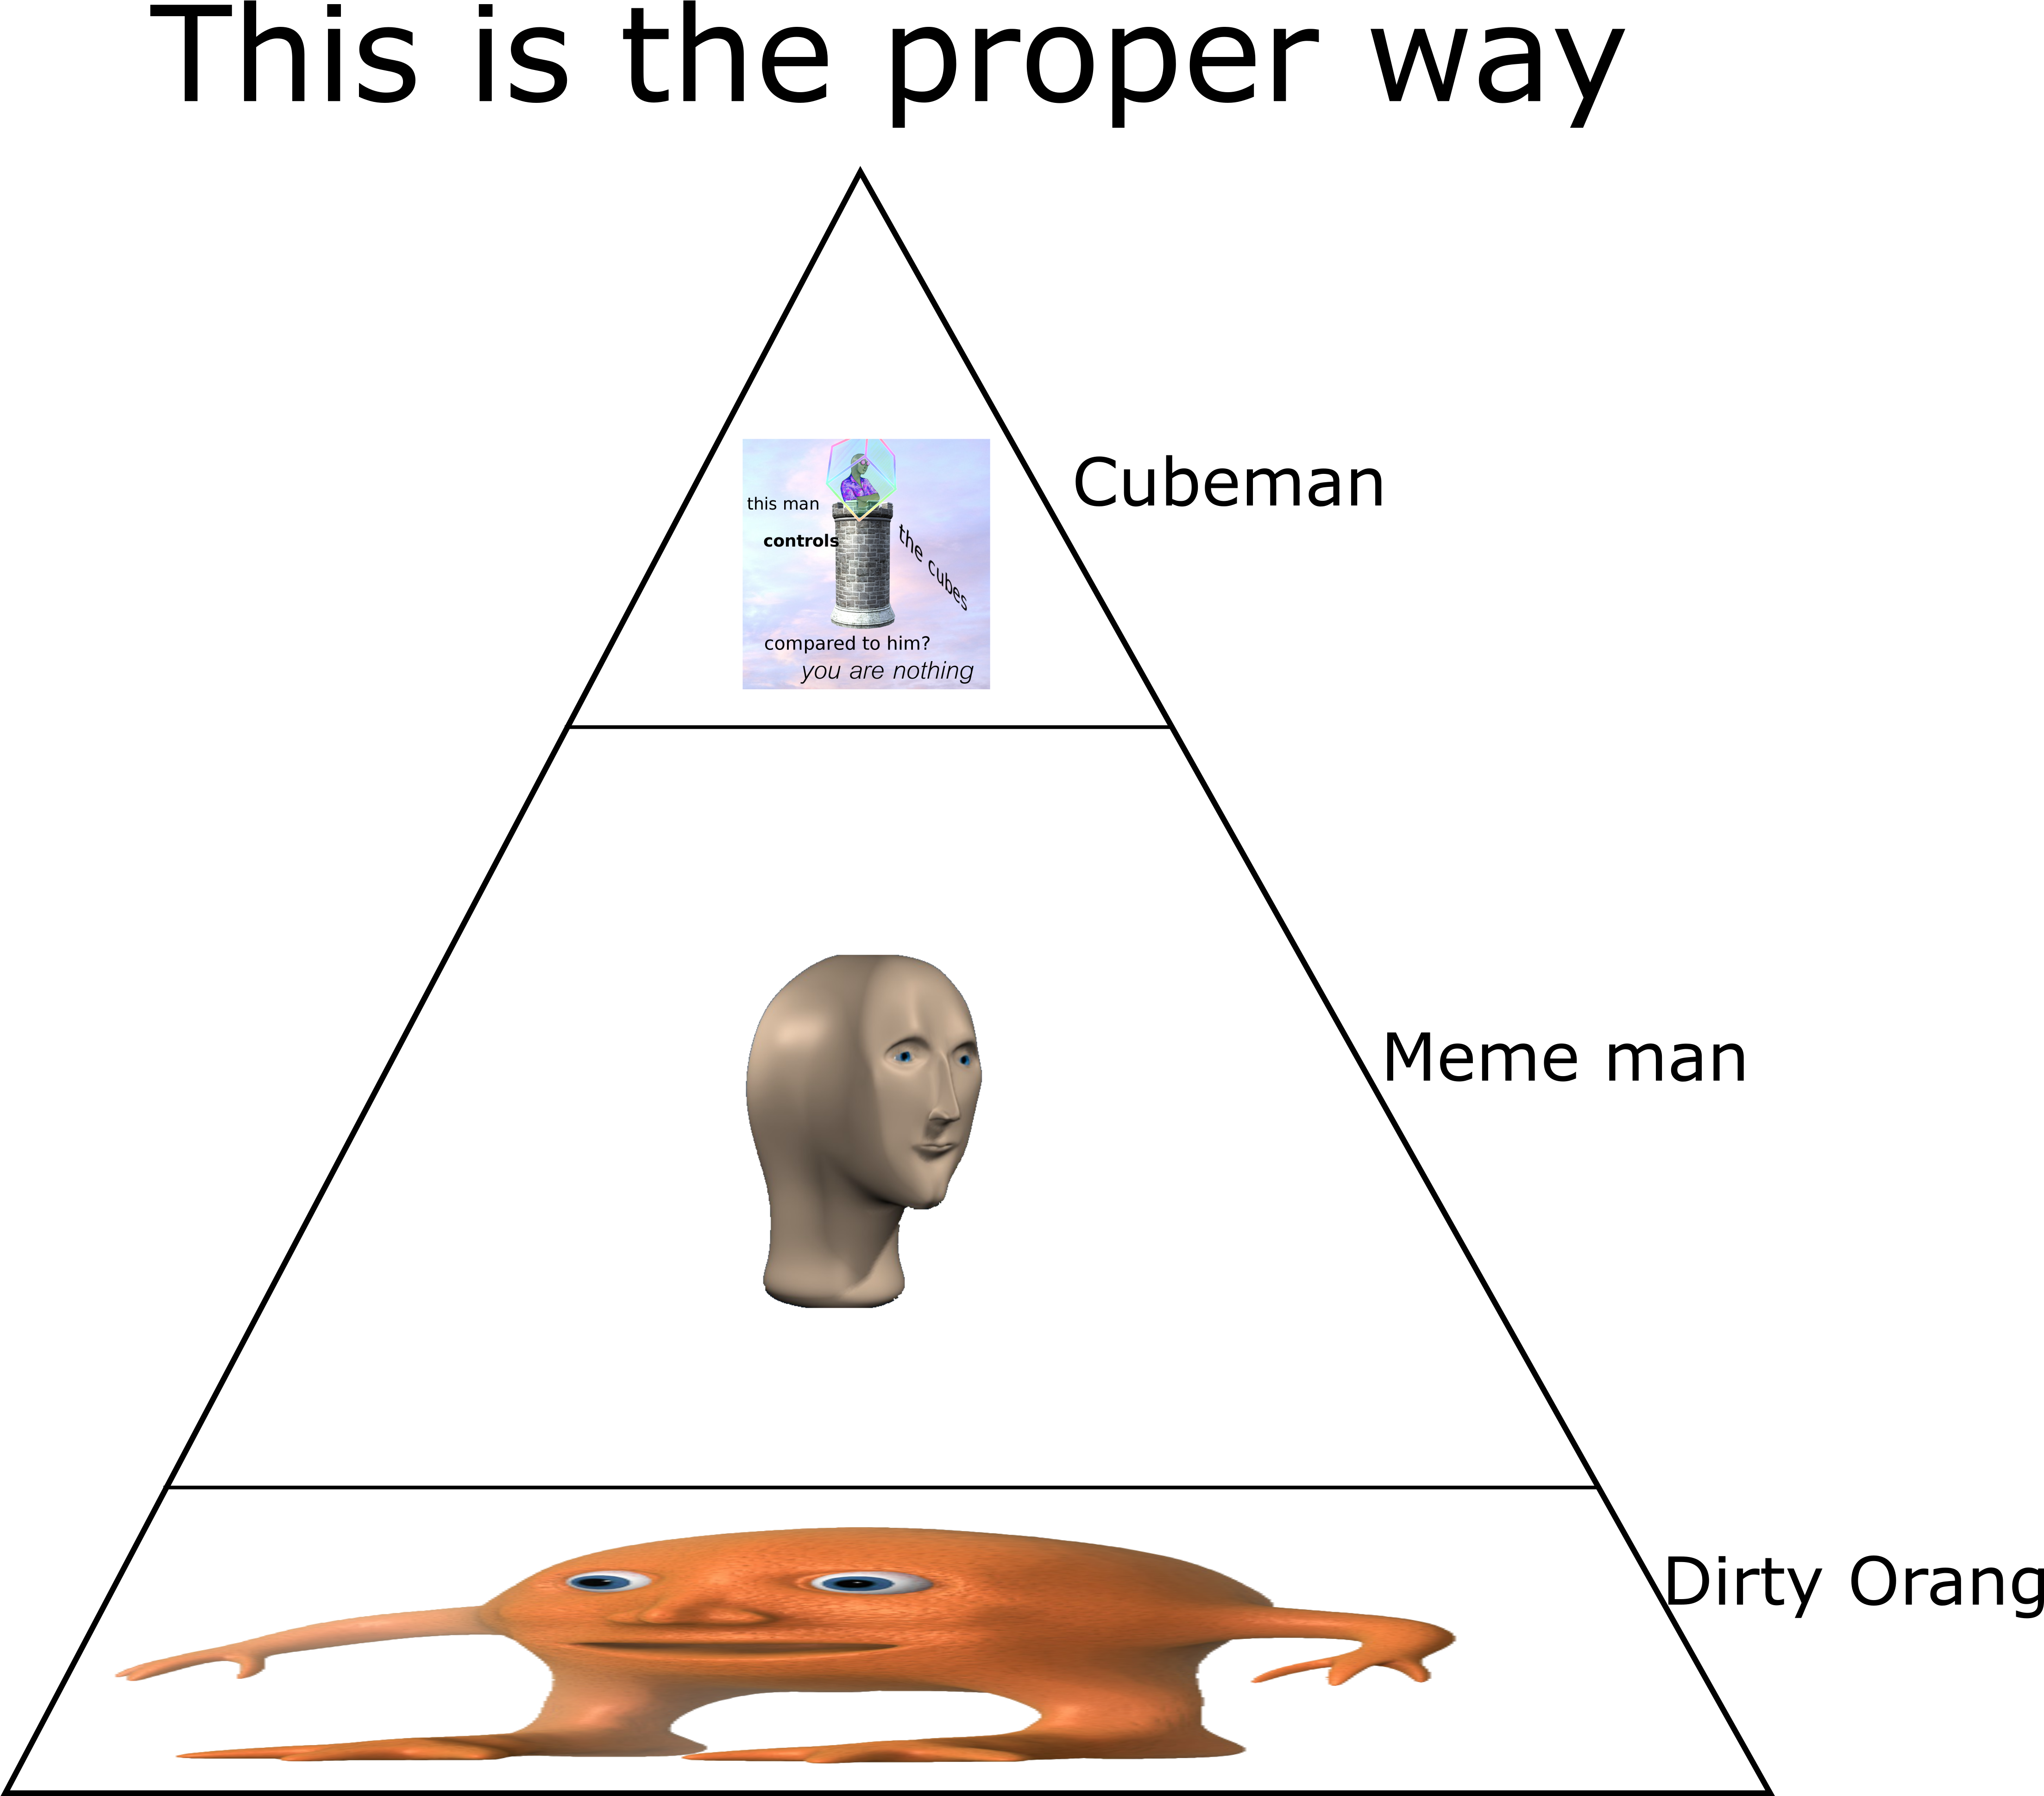 Surreal Memes Compared To Him You Are Nothing, Hd Png Download